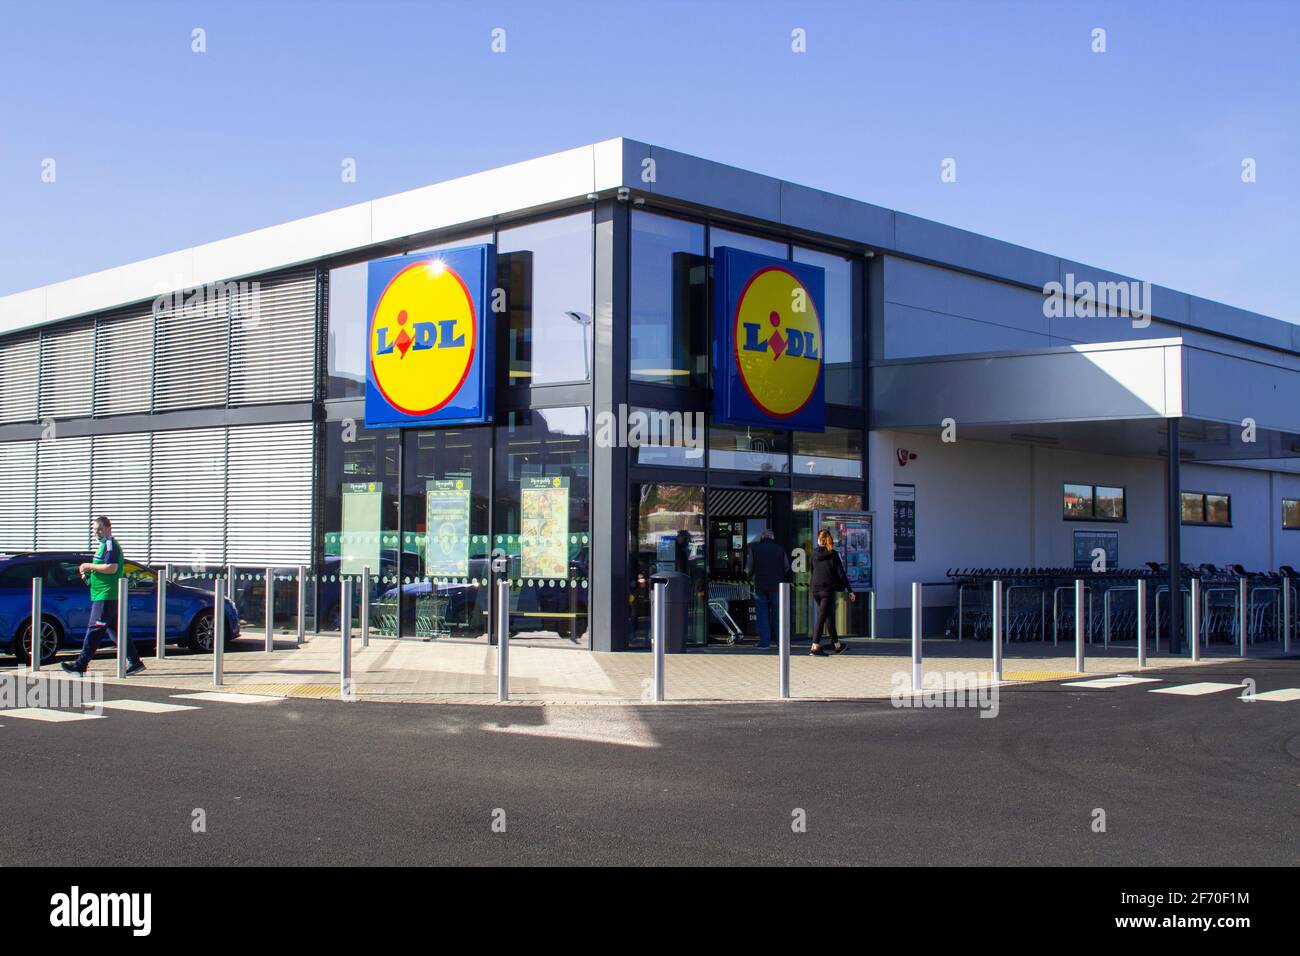 3 April 2021 Customers entering the brand new Lidl discount super store in Castlebawn Retail park in newtownards, County Down on opening day Stock Photo